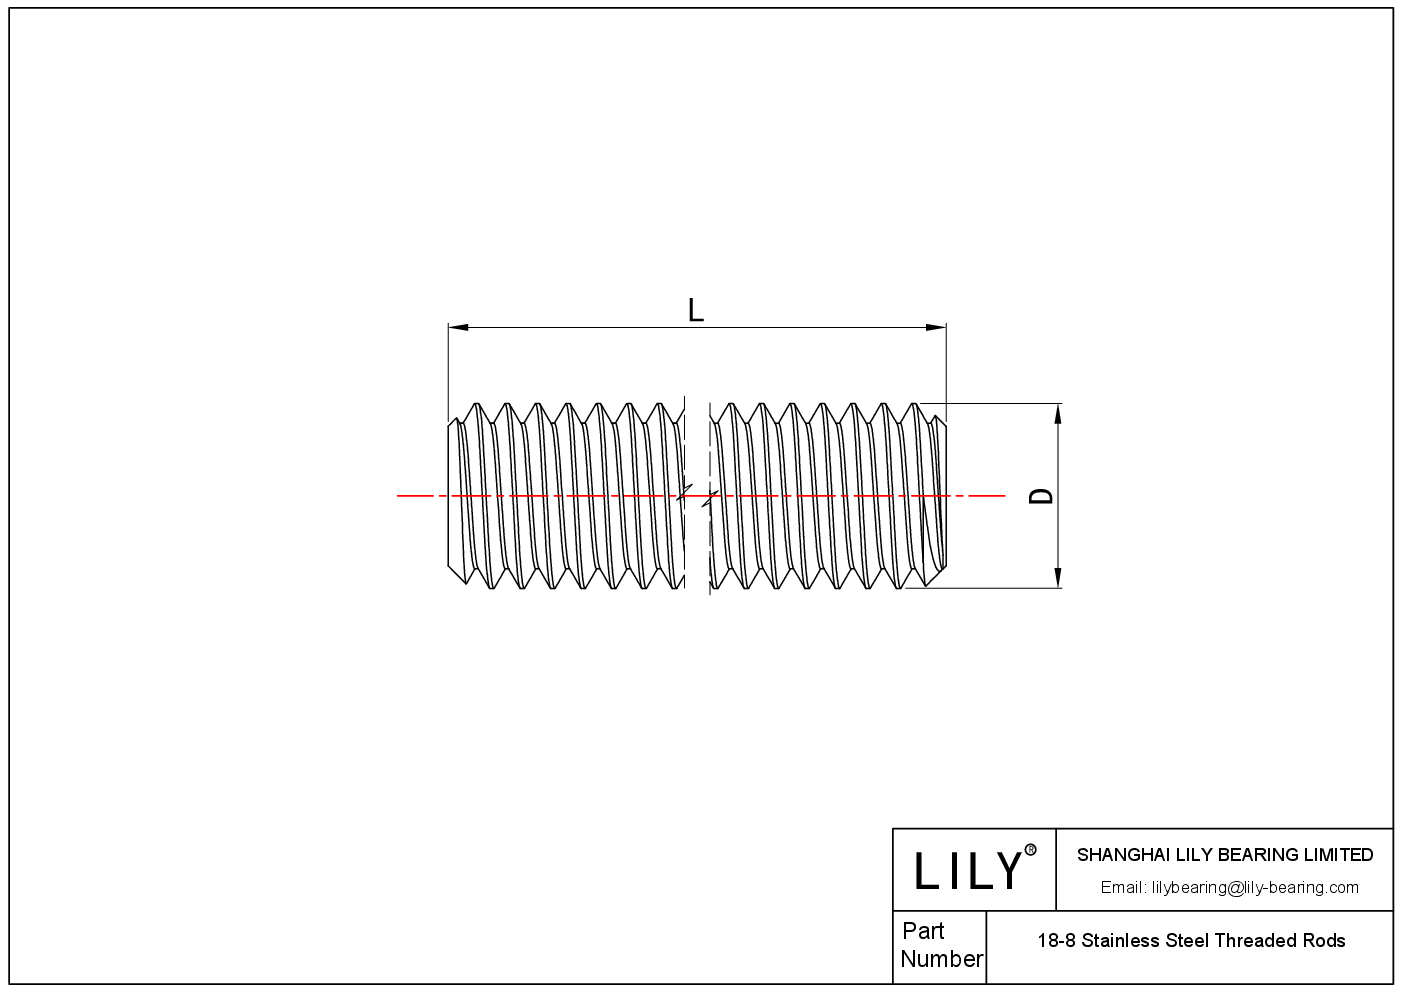 JFEBCAIFJ 18-8 Stainless Steel Threaded Rods cad drawing